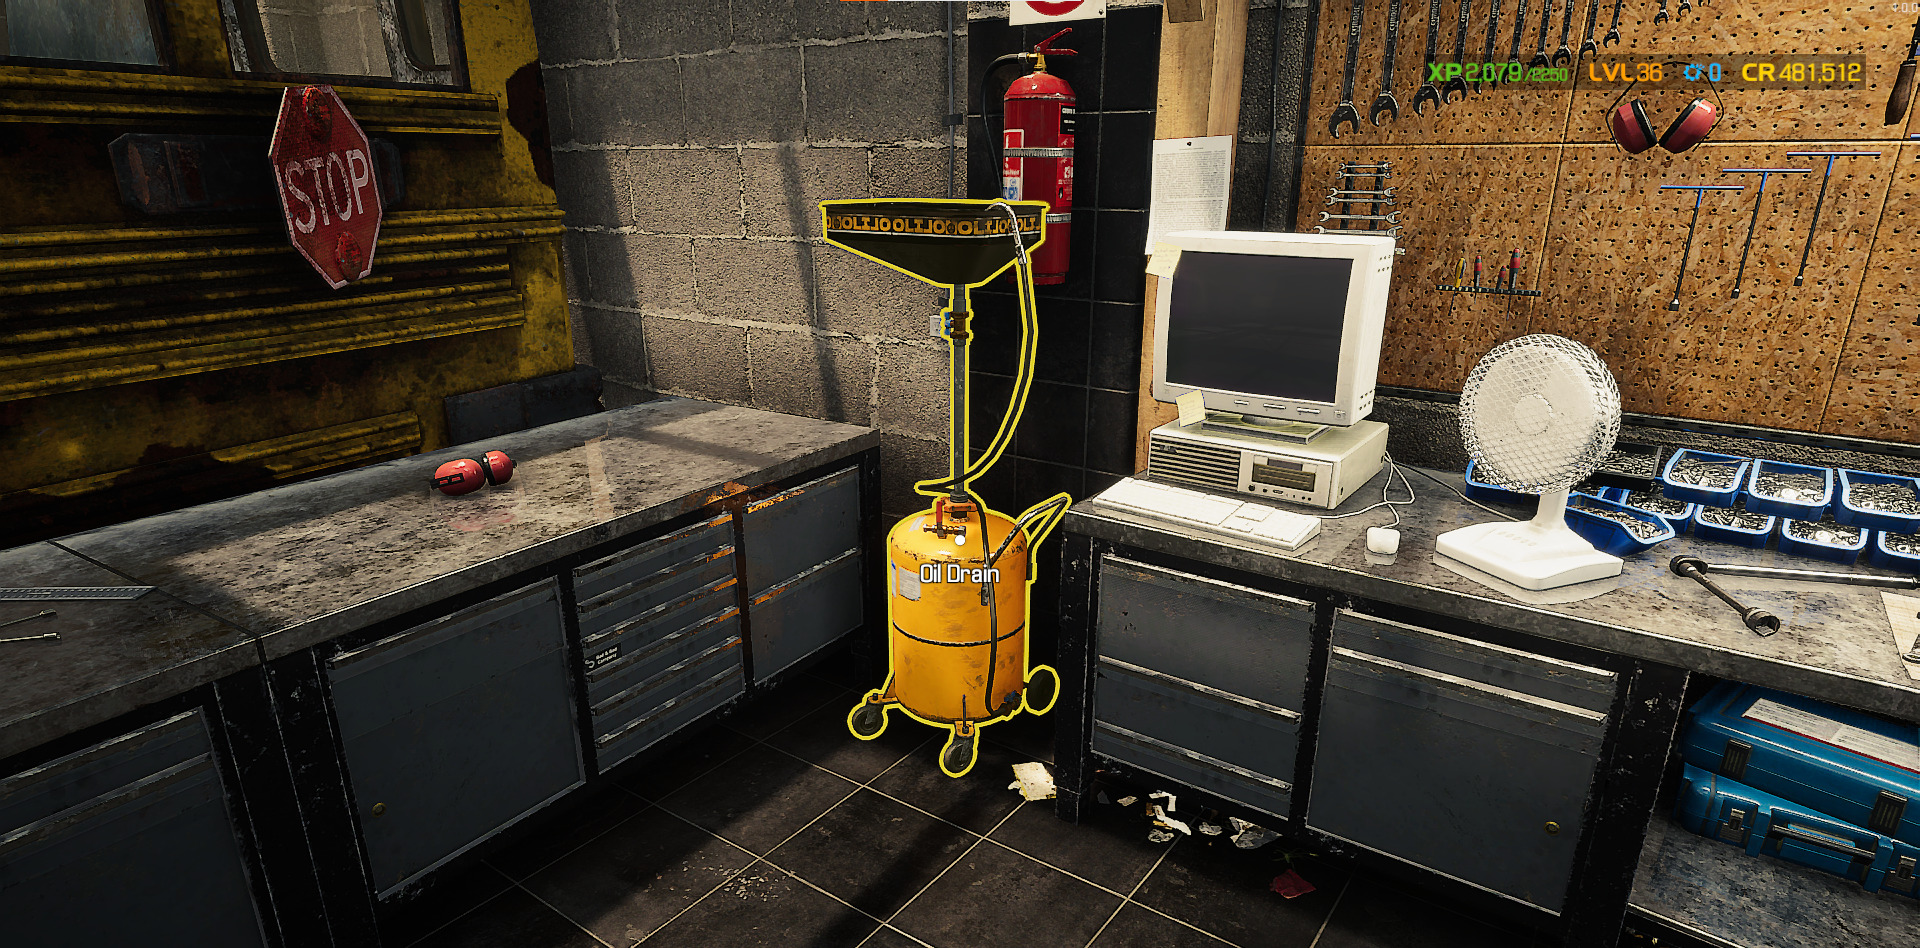 You need to use the Oil Drain Tool to drain the old oil from cars in Car Mechanic Simulator. 